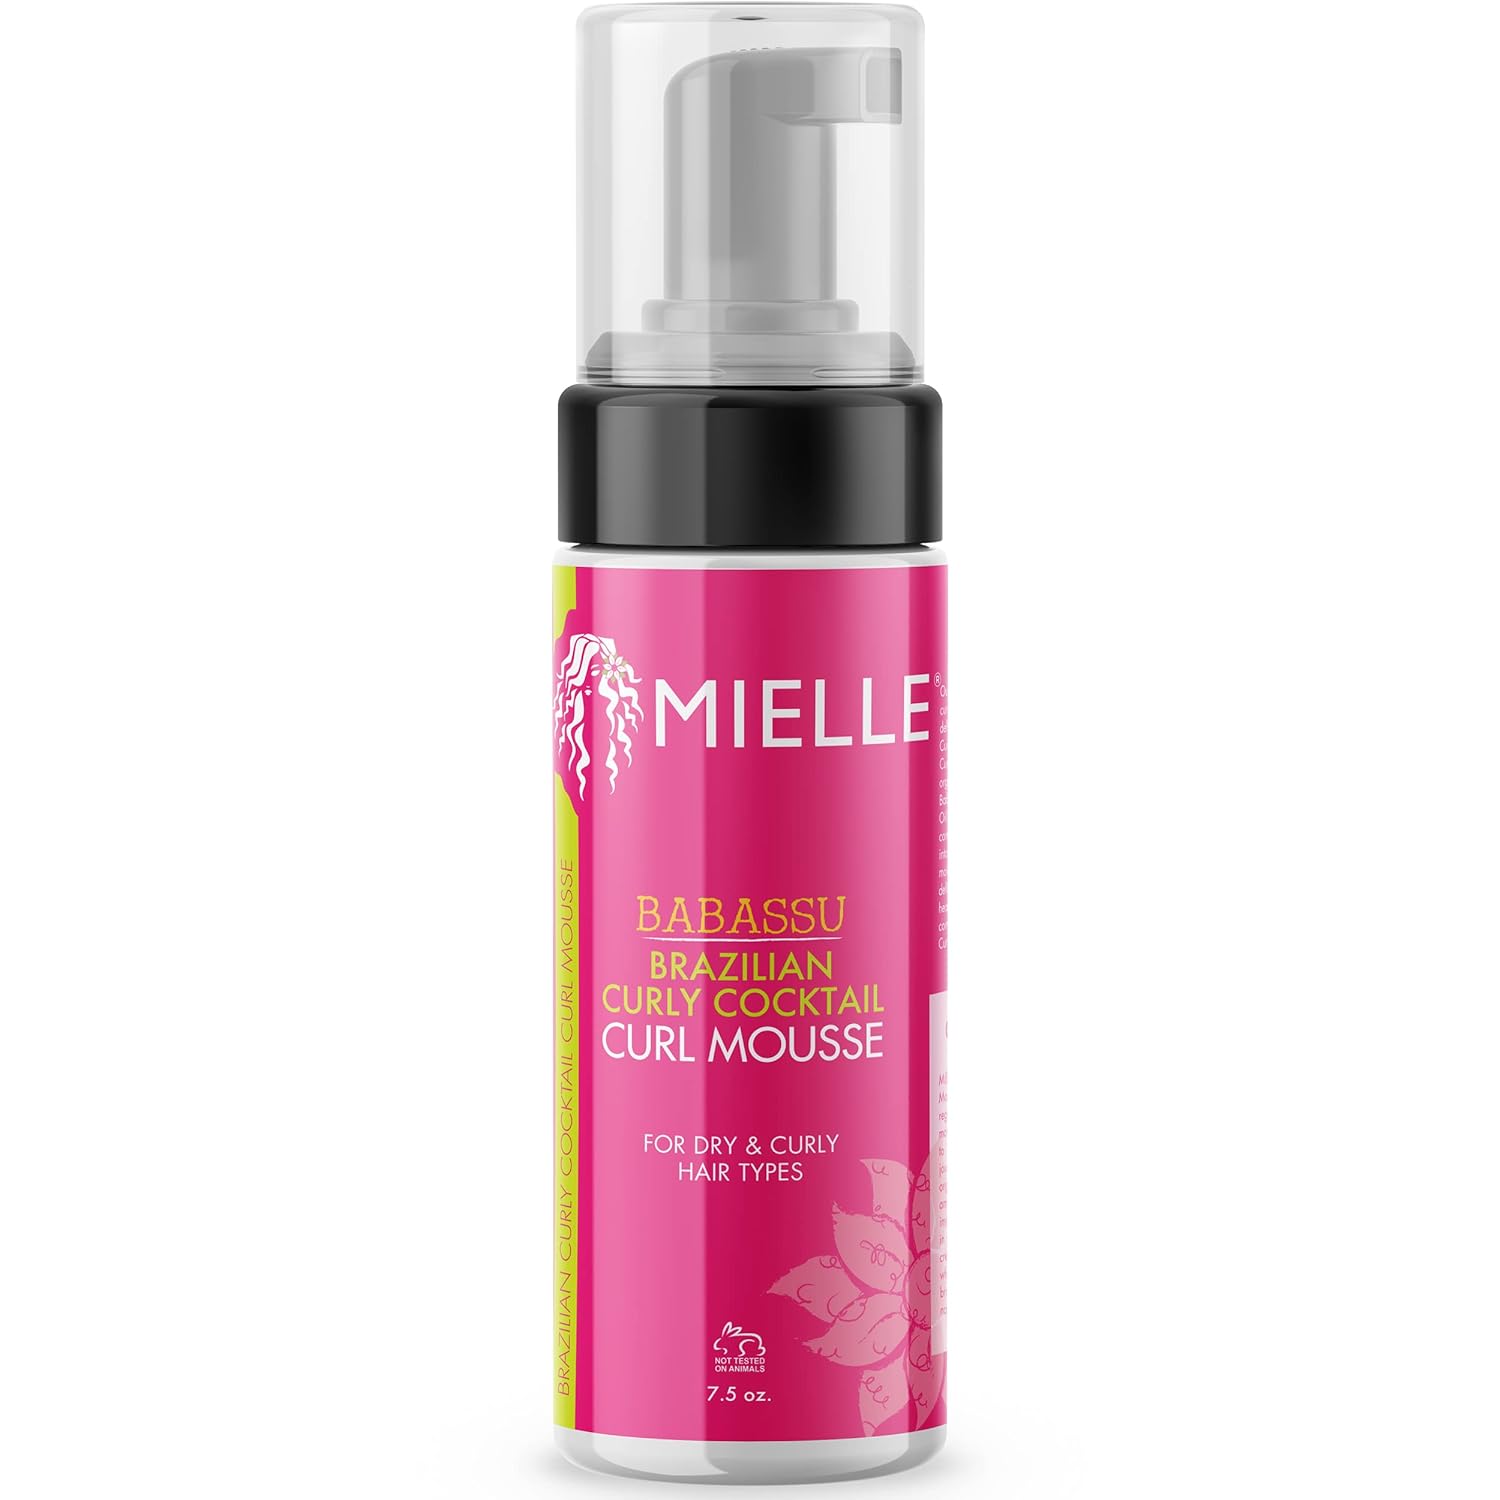 Mielle Brazilian Curly Cocktail Curl Mousse with Babassu Oil, 7.5 Oz